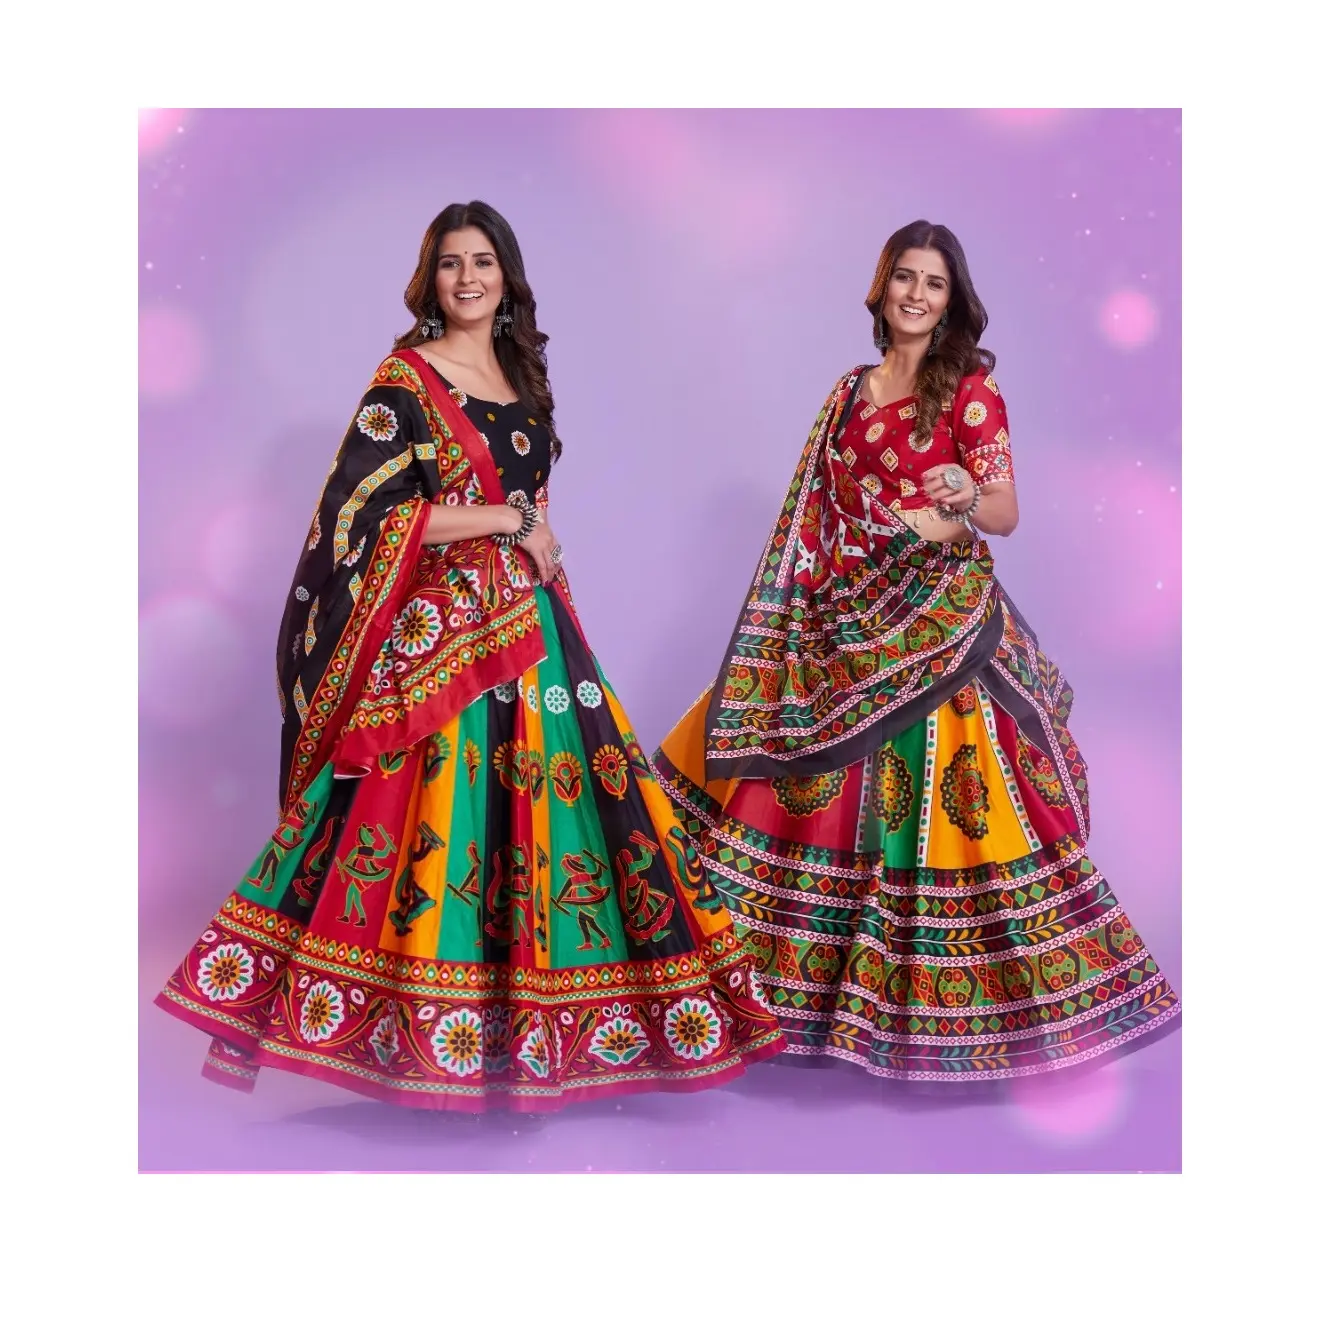 New Exclusive Festival Wear Hand Block Printed Navratri Collection Chaniya Choli for Festival Wear at Export Price